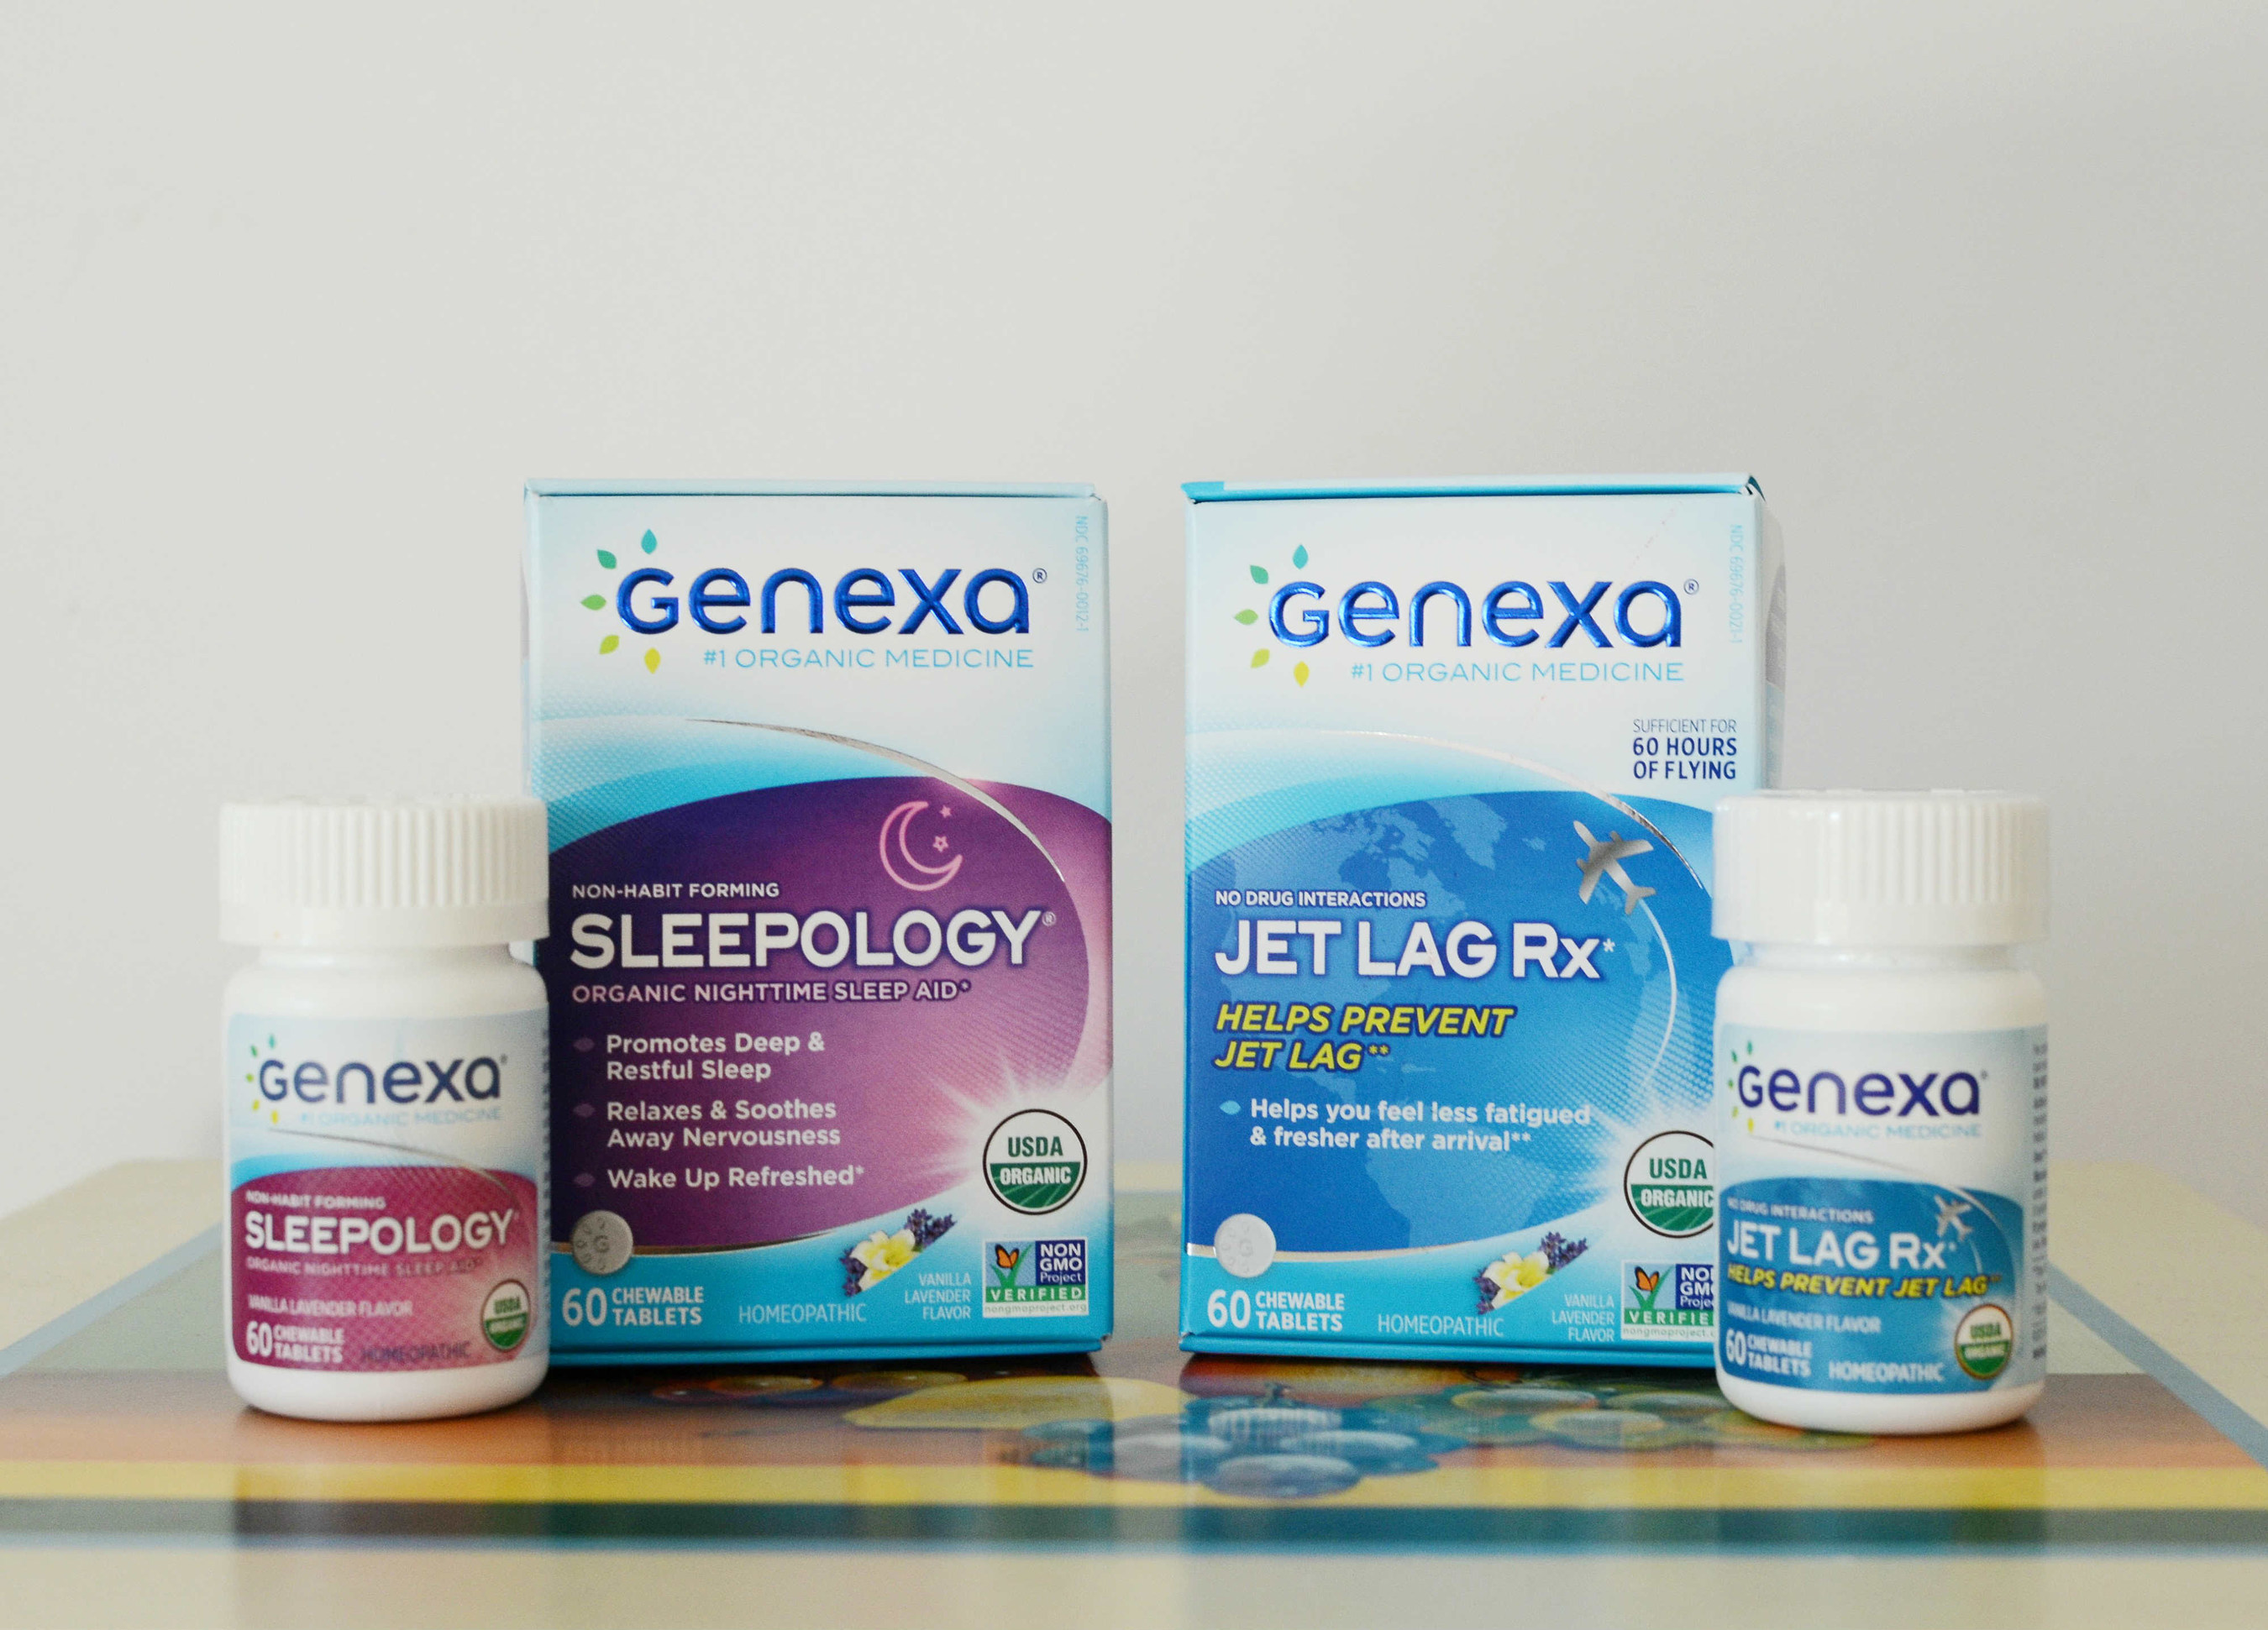 THE FIRST & ONLY ORGANIC & NON-GMO MEDICINES. genexahealth.com